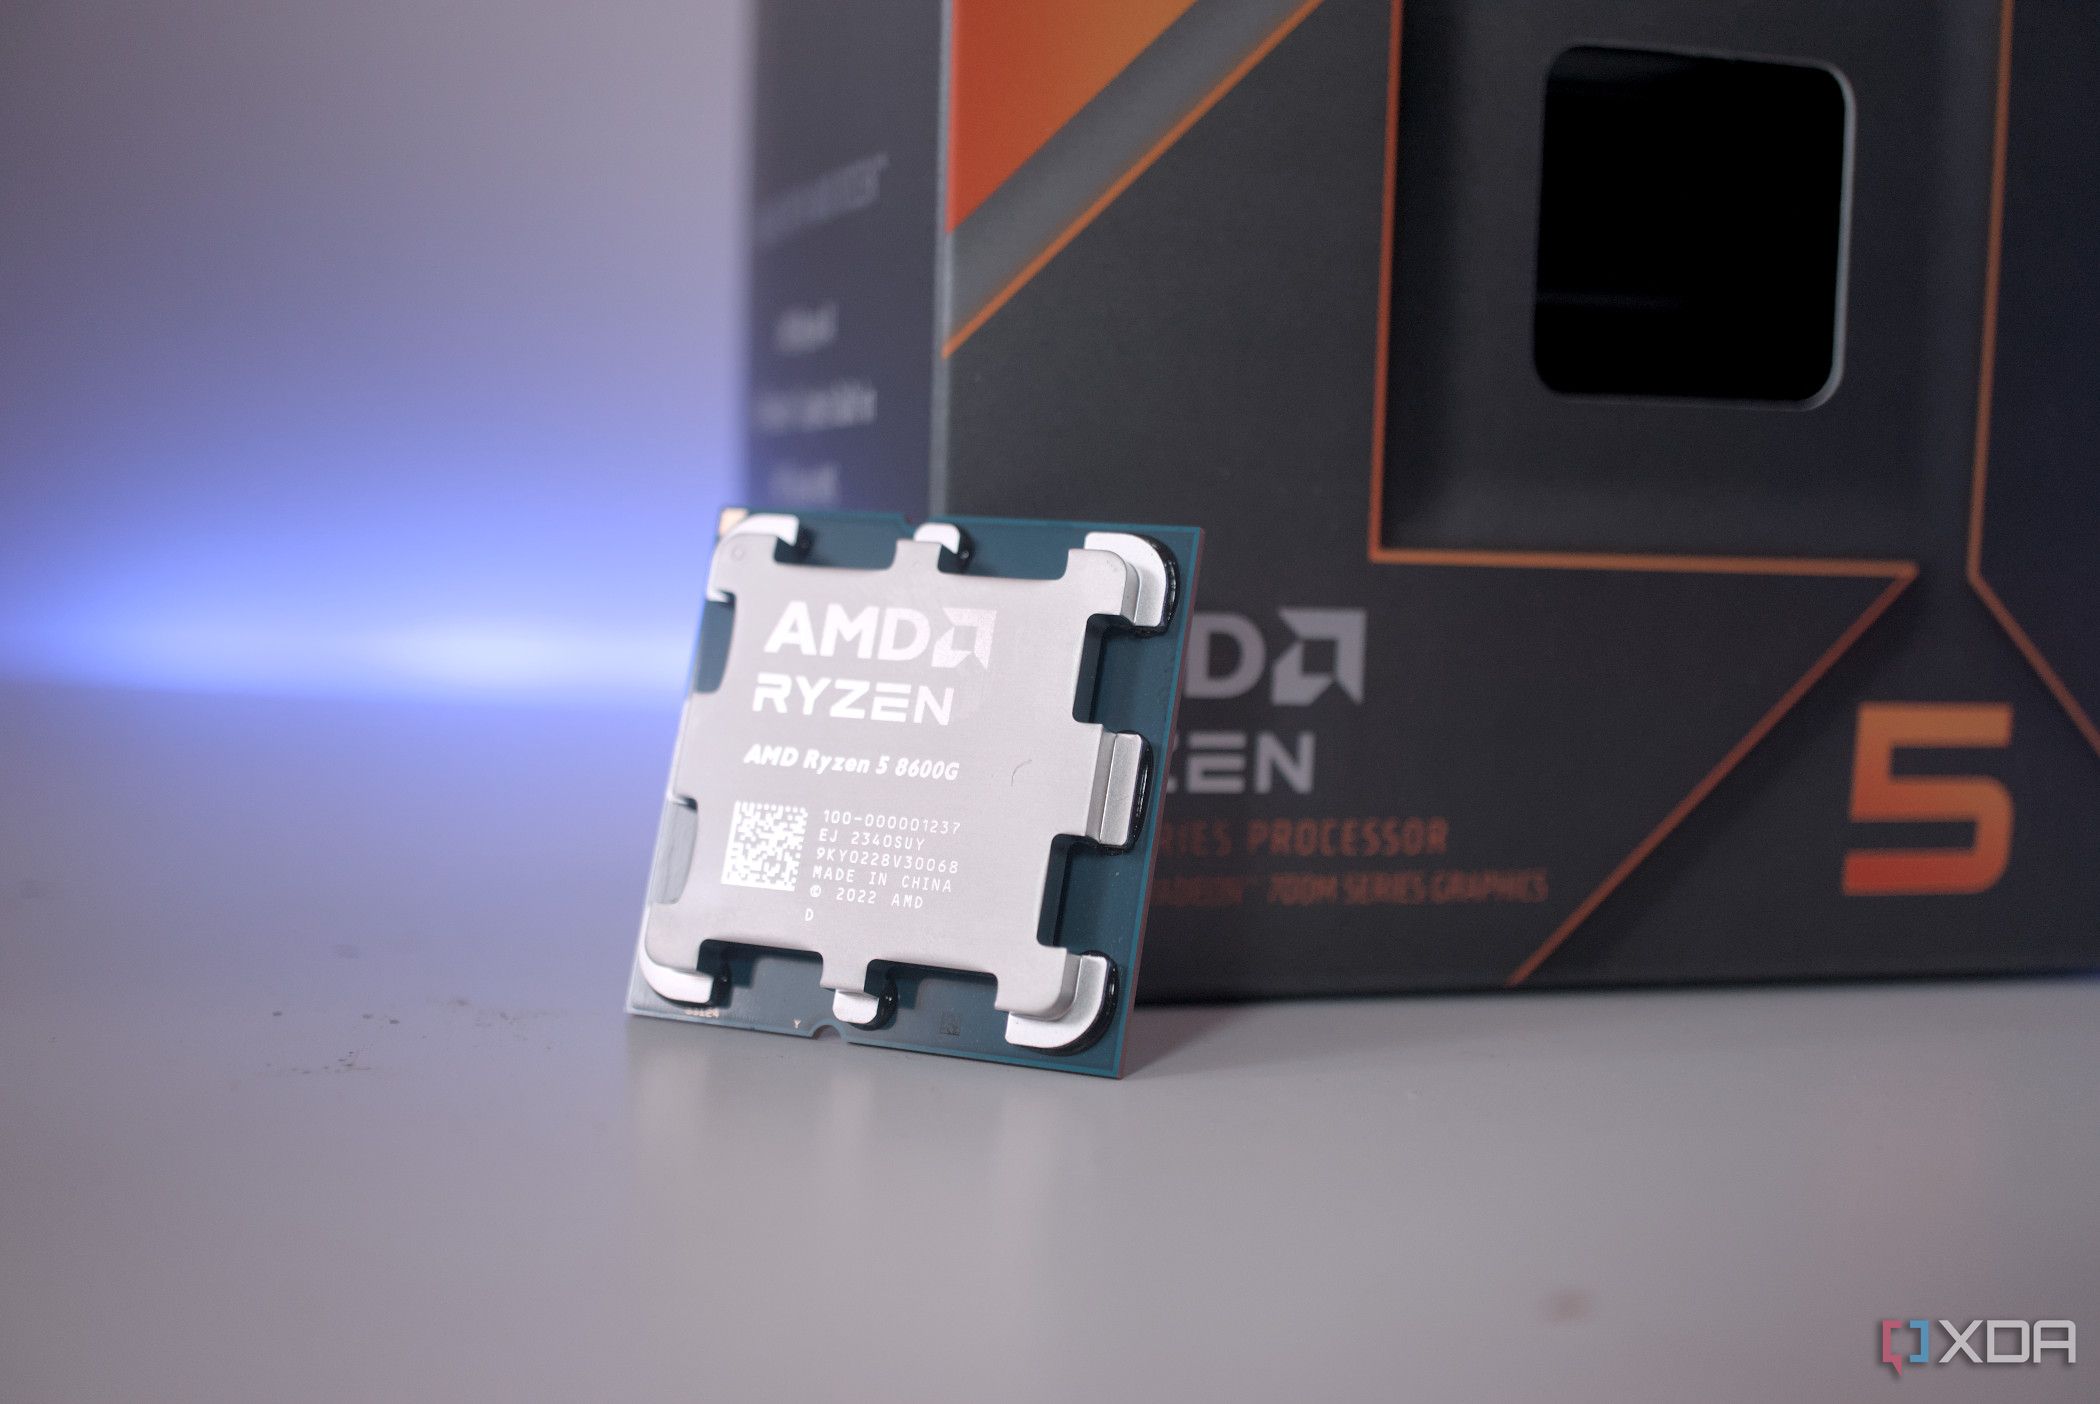 AMD Ryzen 5 8600G review: The only affordable gaming CPU you